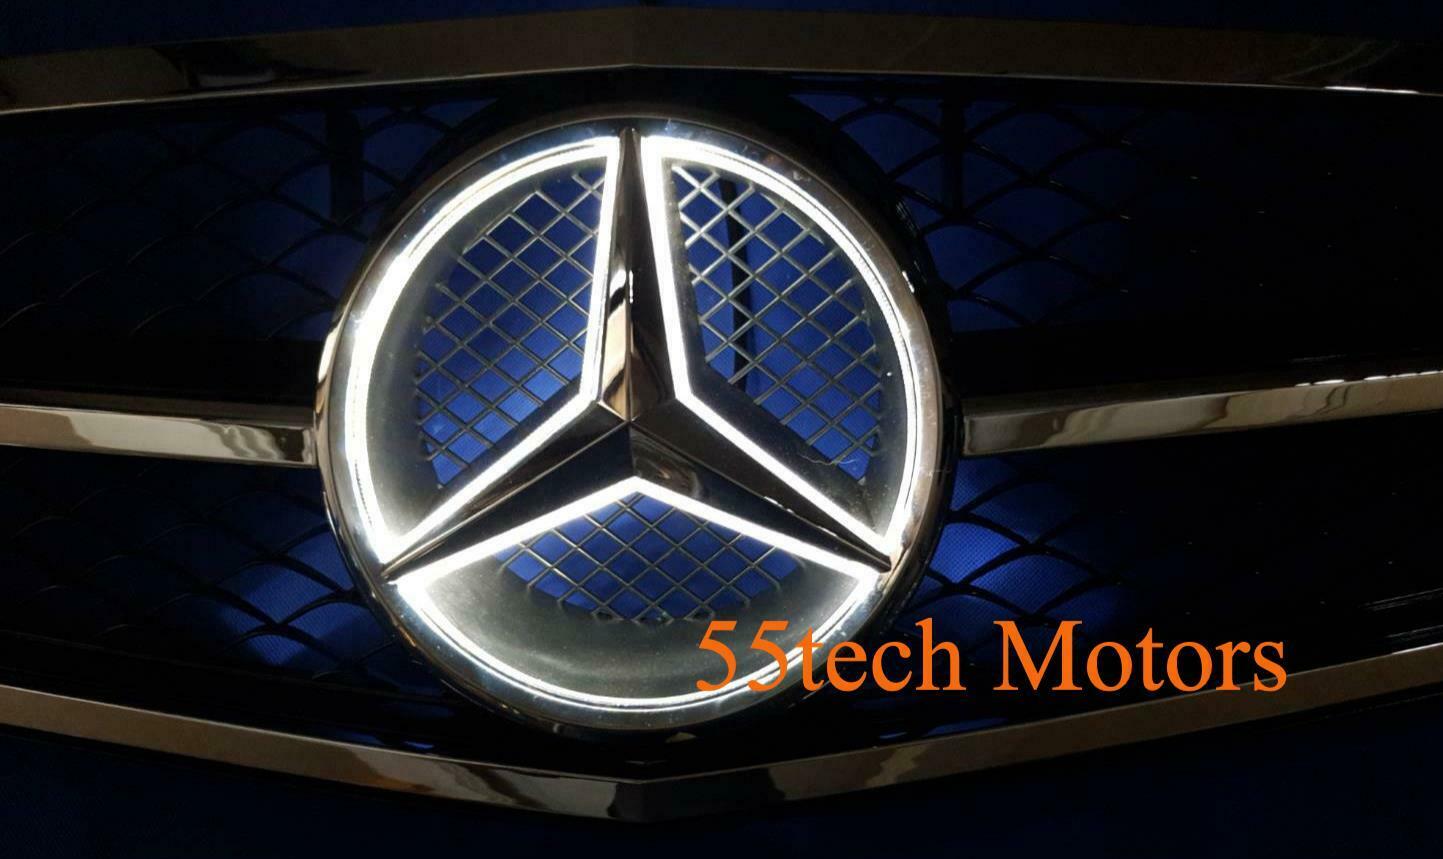 Mercedes W204 C-Class 2008-2013 Illuminated LED Star Grille AMG 1 Fin - 55tech Motors